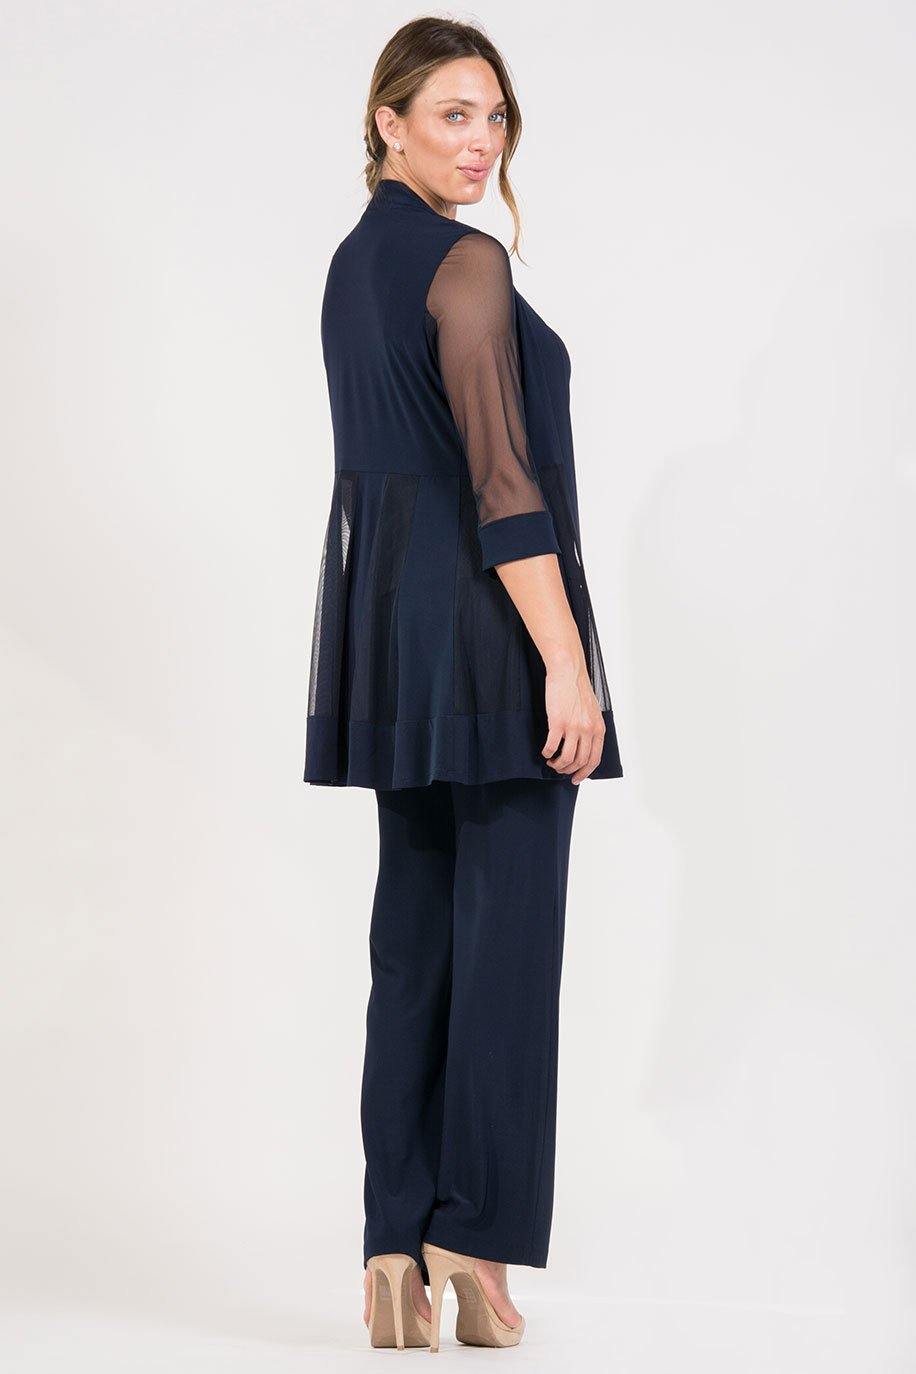 R&M Richards Mother of the Bride Formal Pants Suit Navy